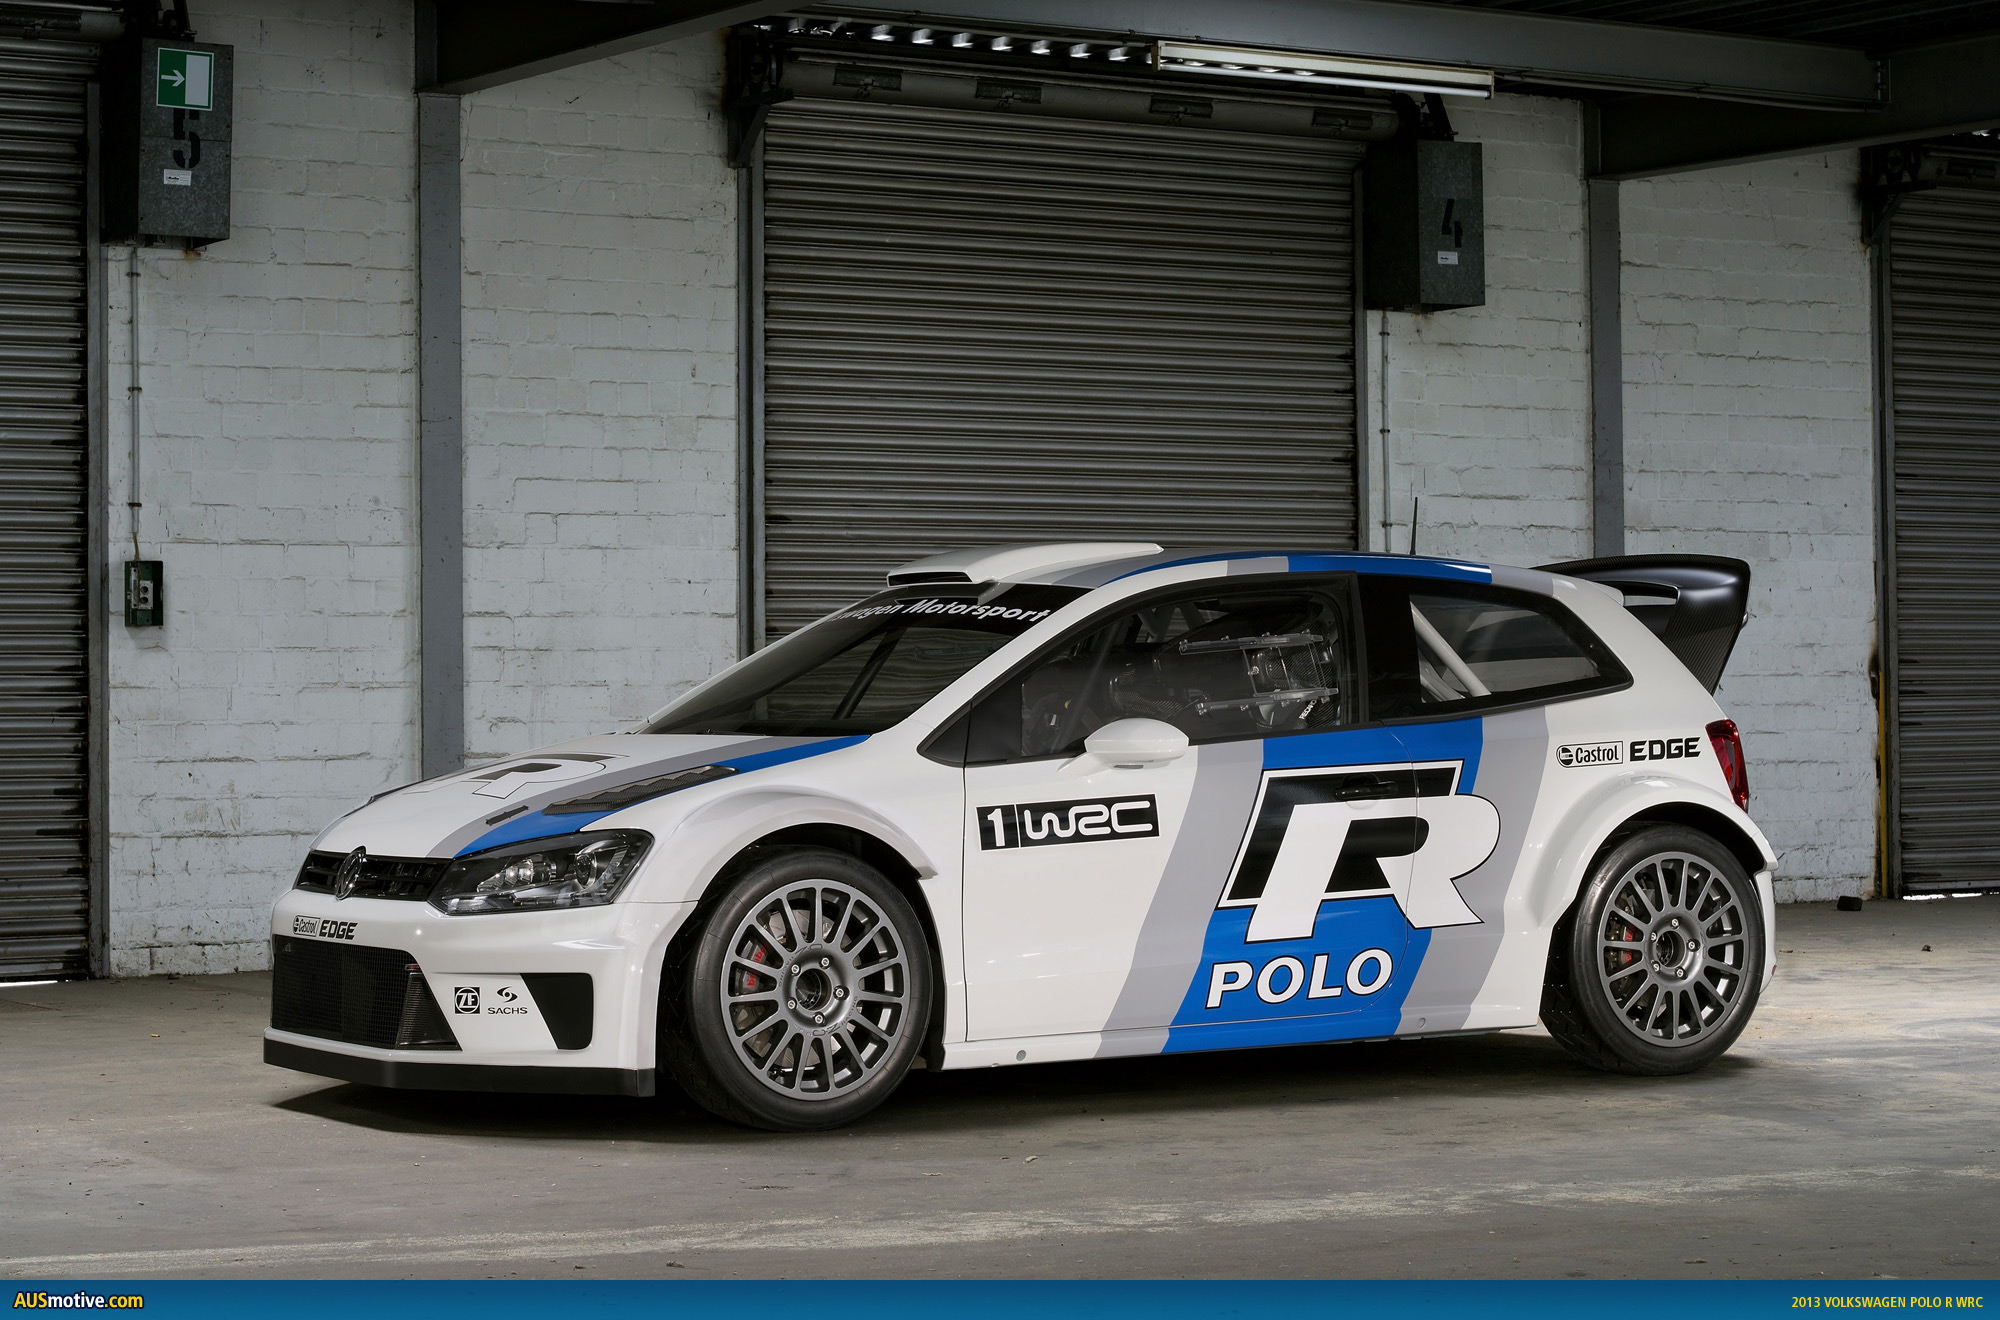 Images of 2013 Volkswagen Polo Wrc | 2000x1320